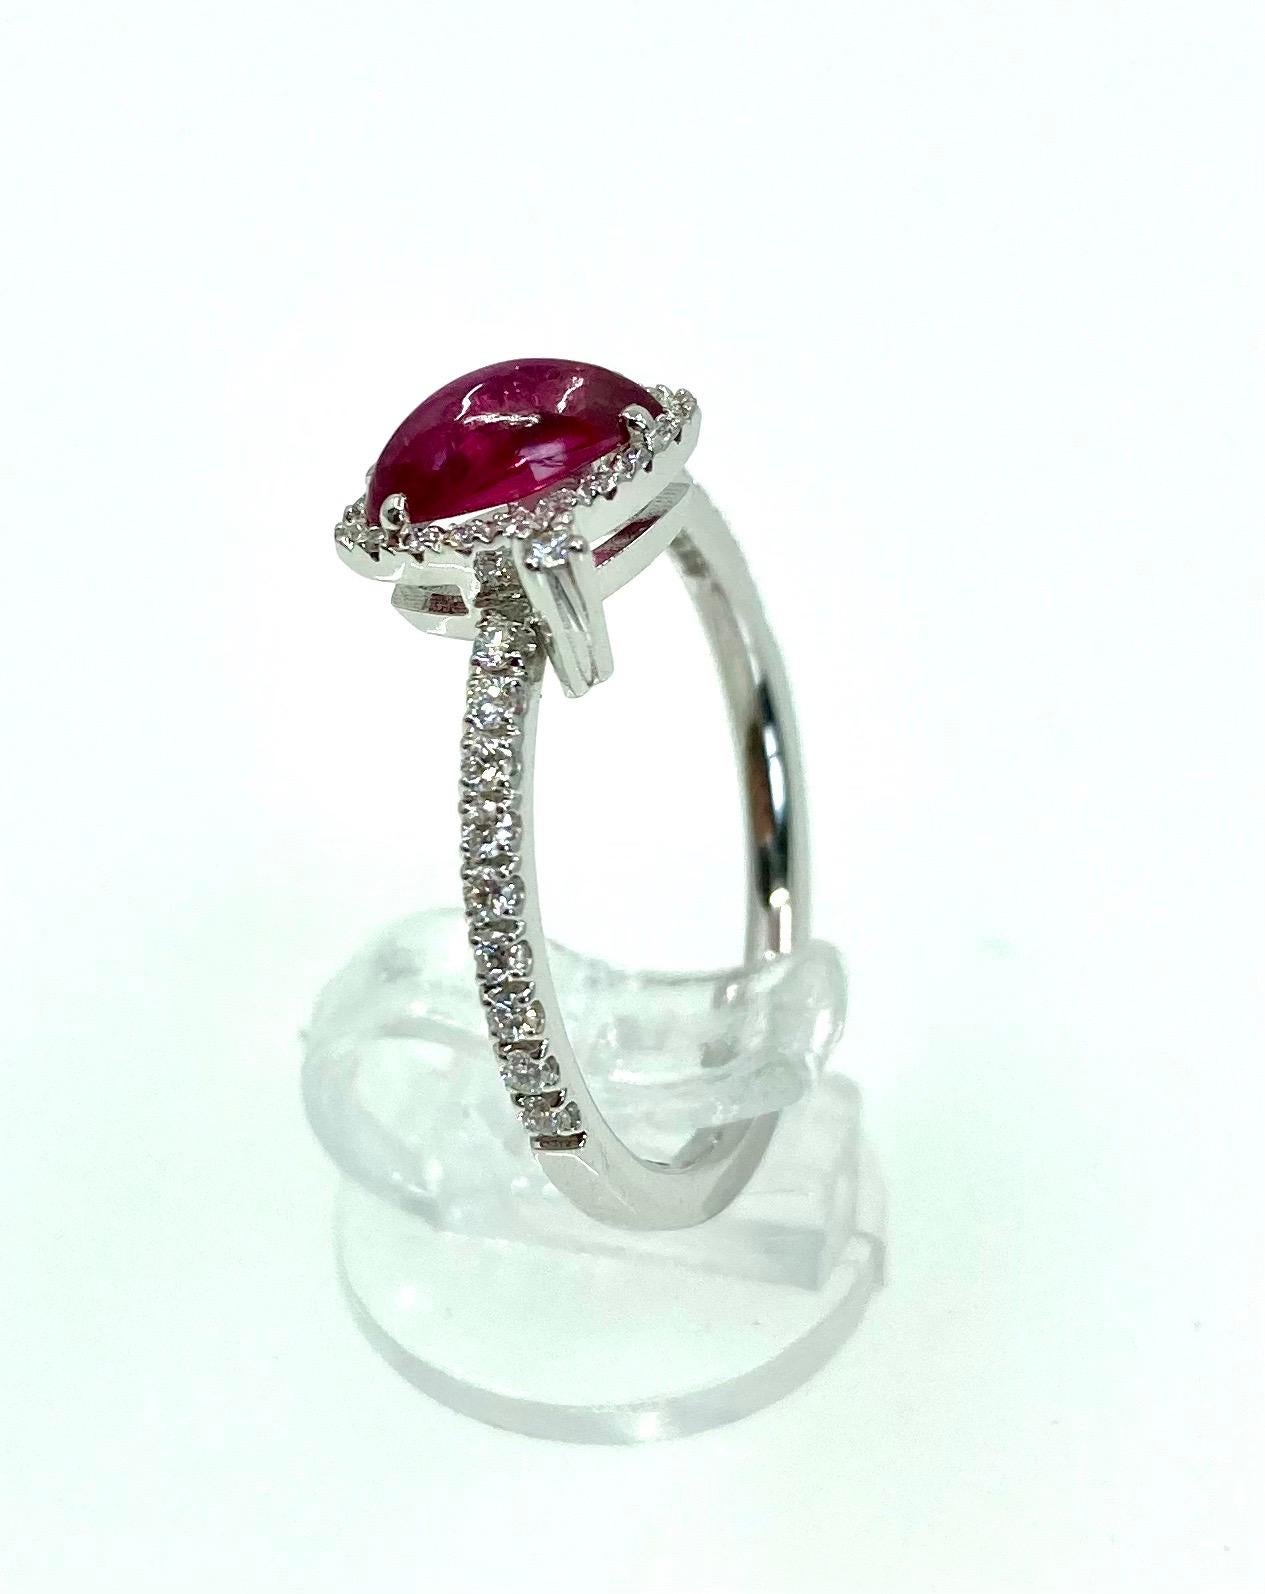 Elegant and fine white gold ring, with a Cabochon Ruby ct. 0.76 and diamonds ct. 0.23, handmade in Italy by Roberto Casarin.

A beautiful Cabochon Ruby, enhanced by surrouding Diamonds and 'solitaire' one as a fine touch. An elegant contrast of